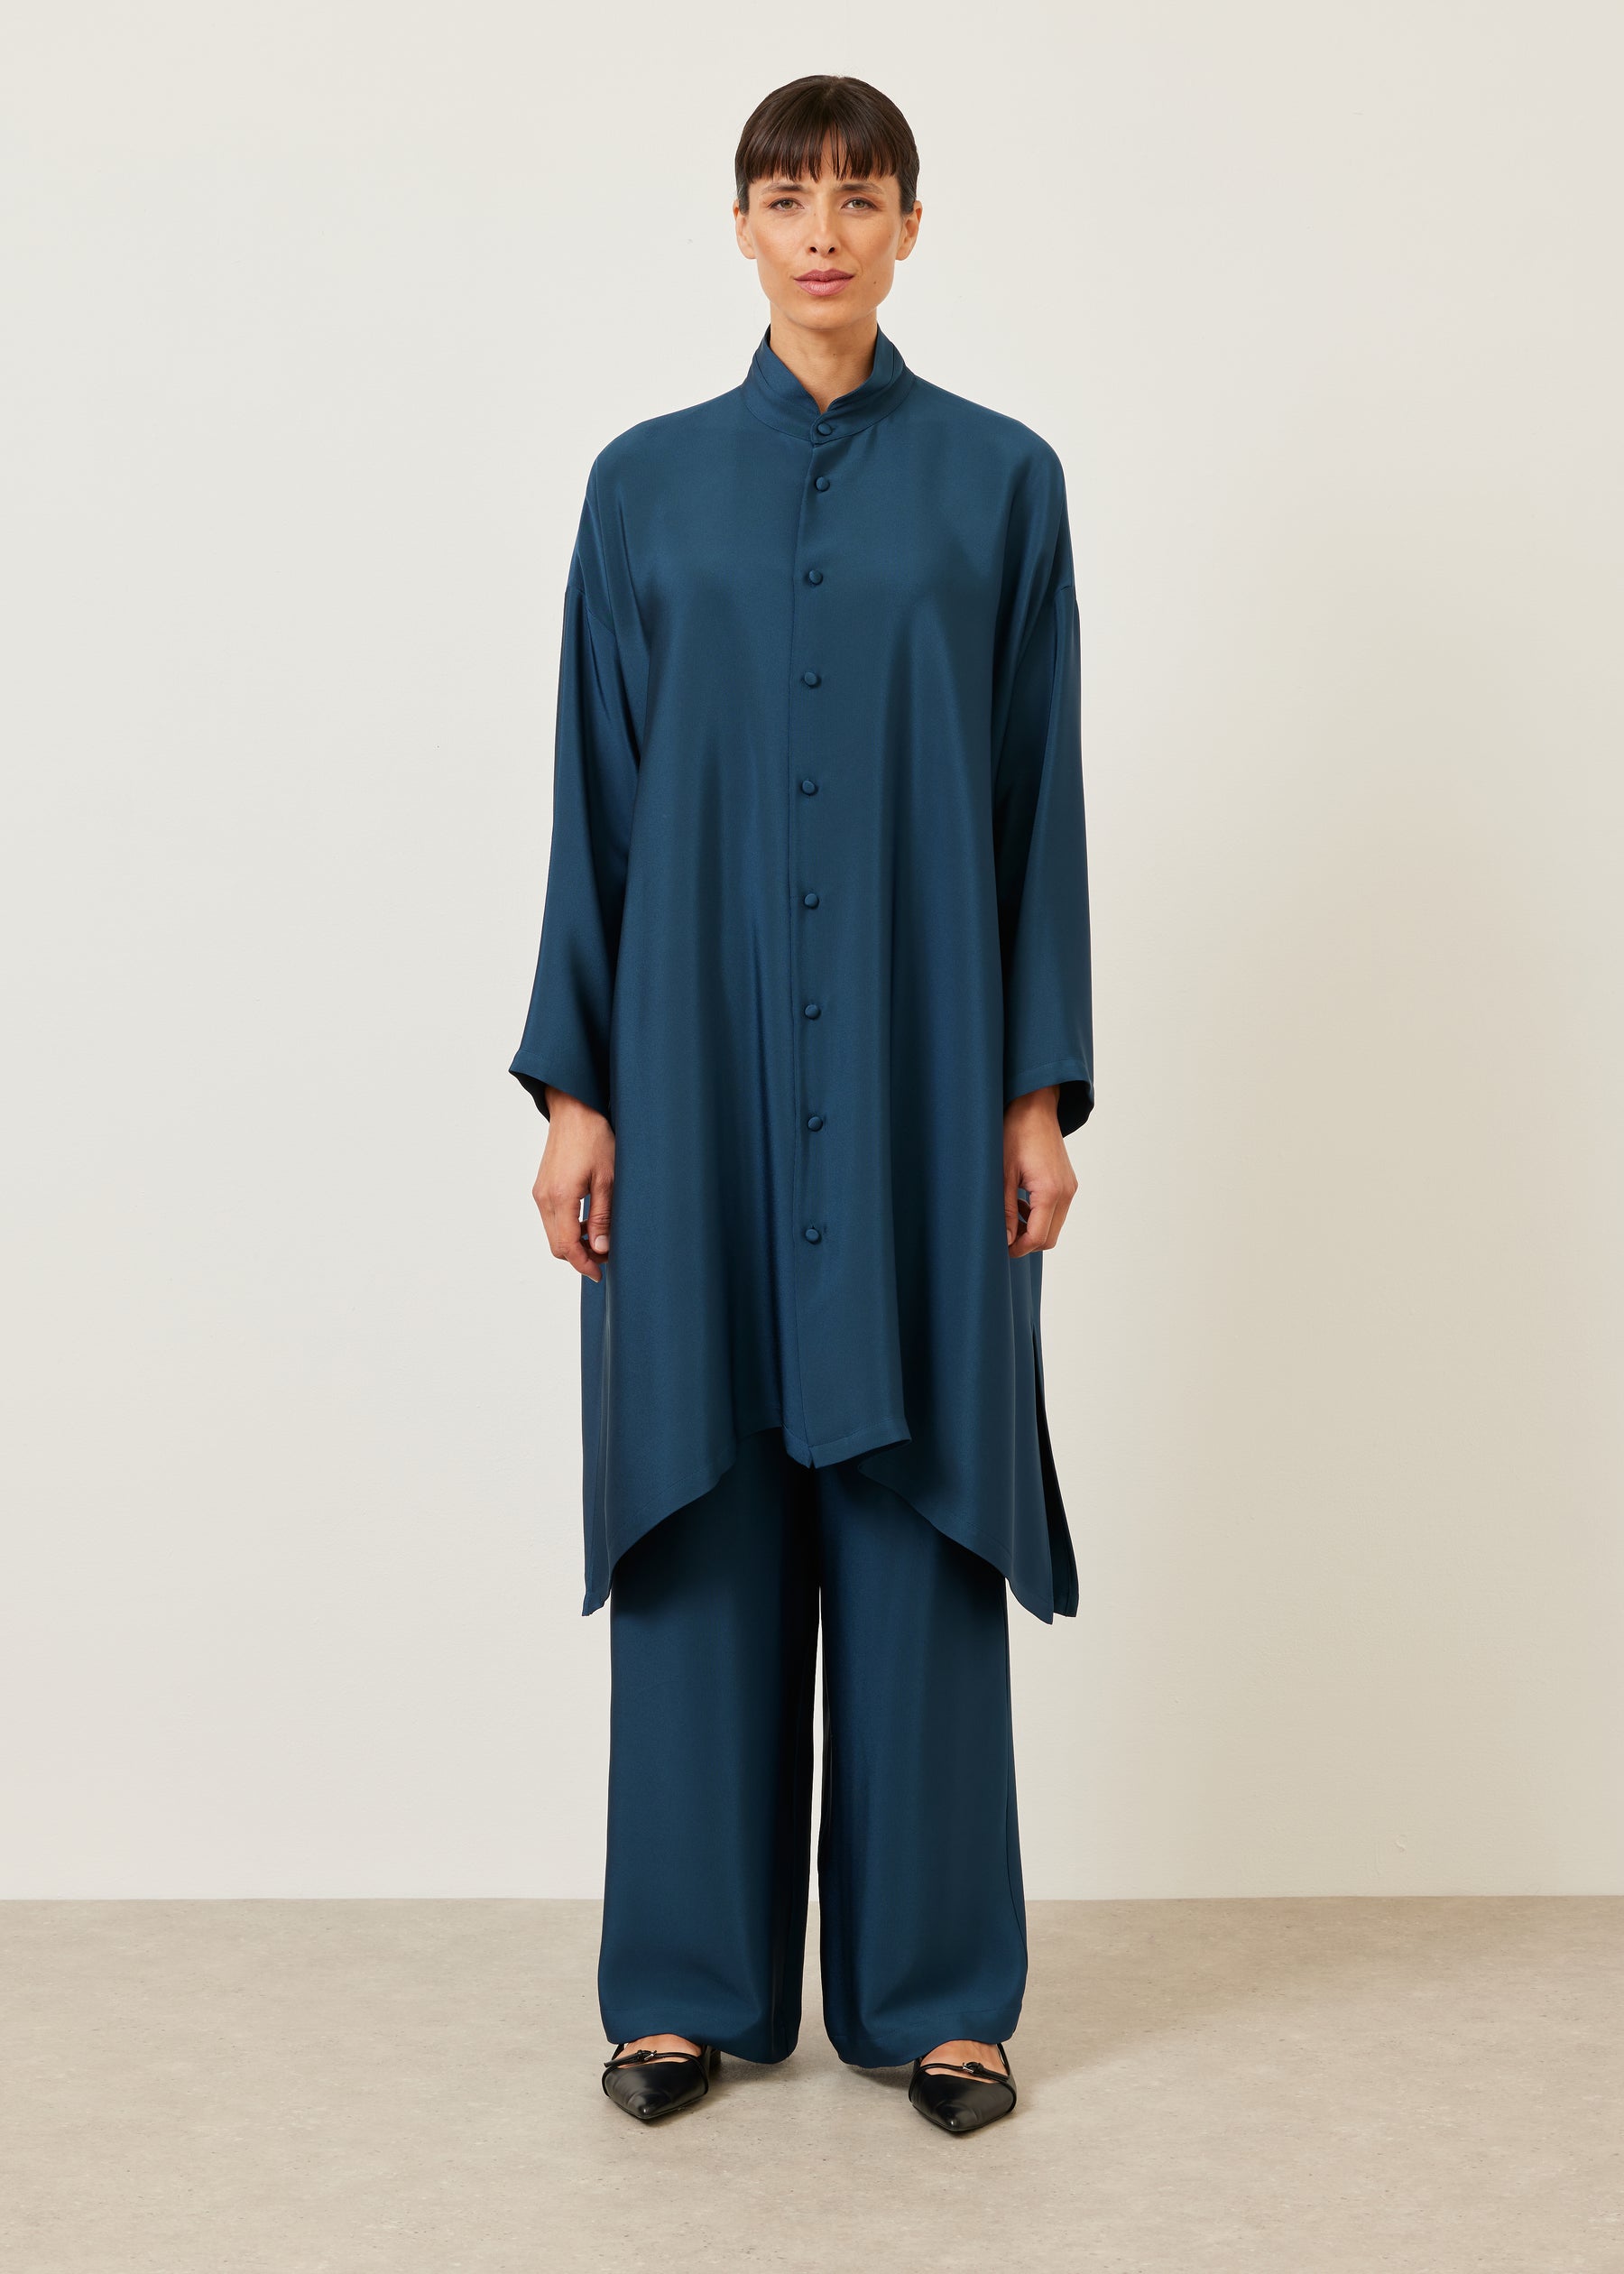 wide a-line double stand collar shirt - very long with slits